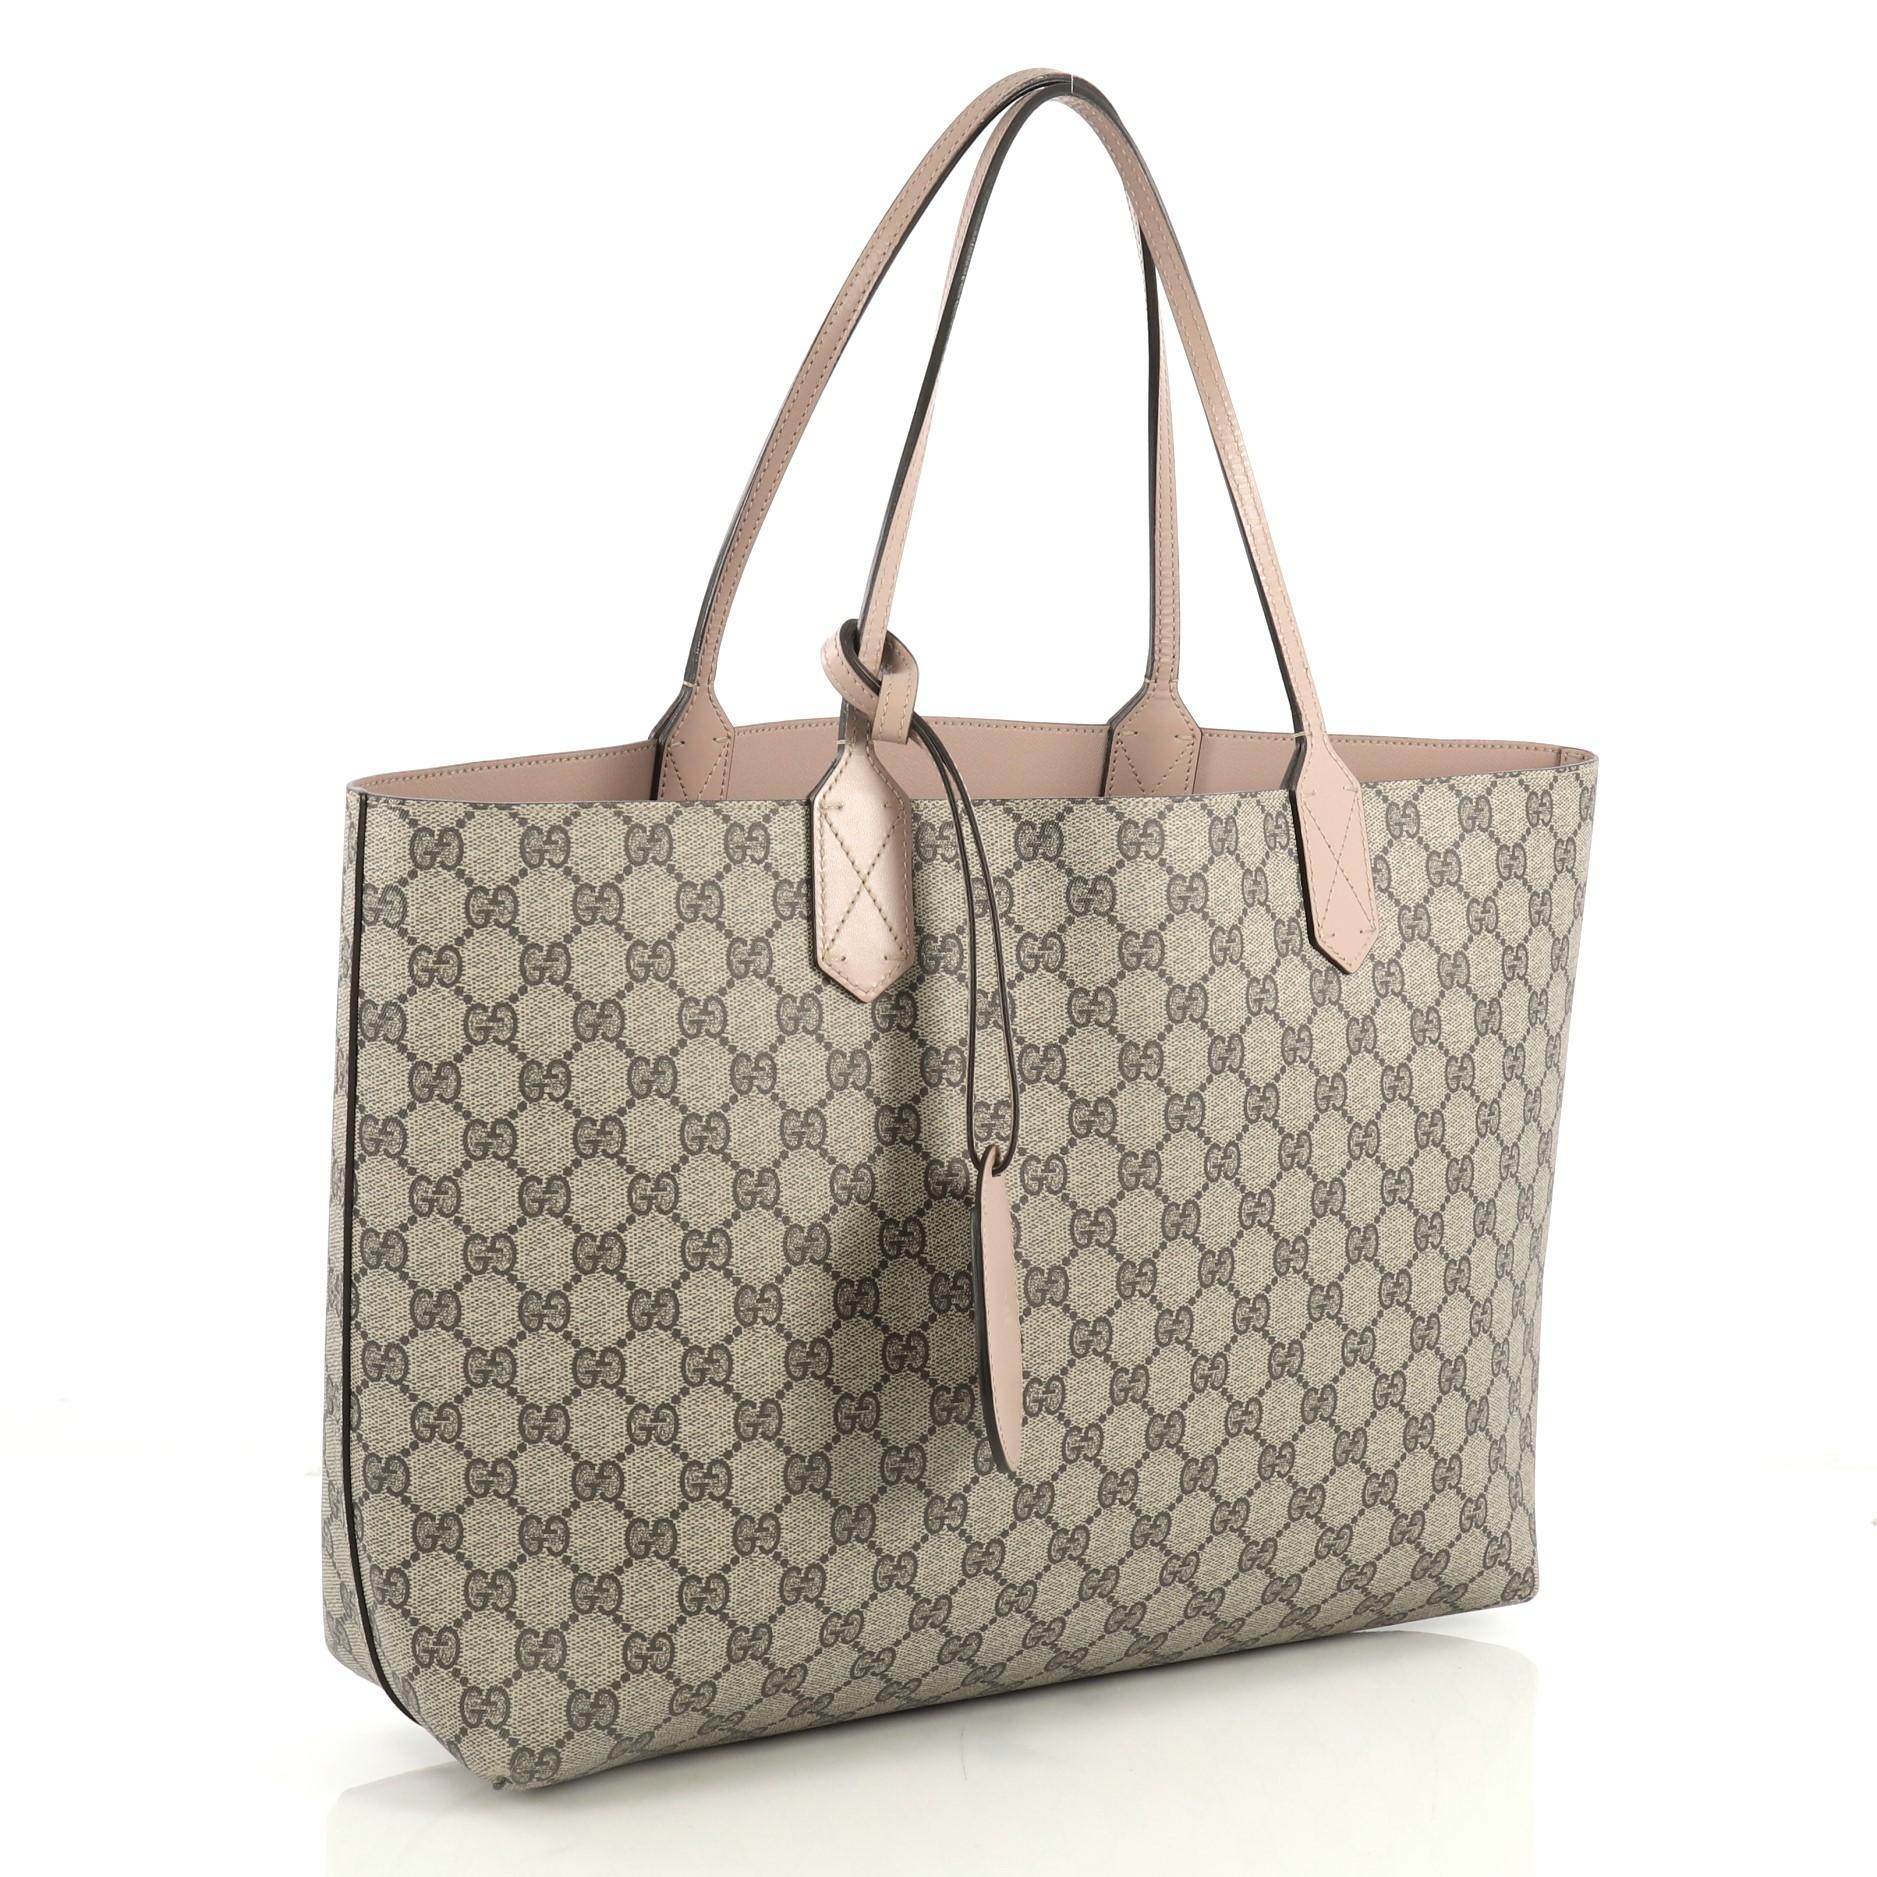 This Gucci Reversible Tote GG Print Leather Medium, crafted in brown GG print leather, features dual flat leather handles. It opens to a reversible neutral leather interior. 

Estimated Retail Price: $1,250
Condition: Great. Wear on base corners,